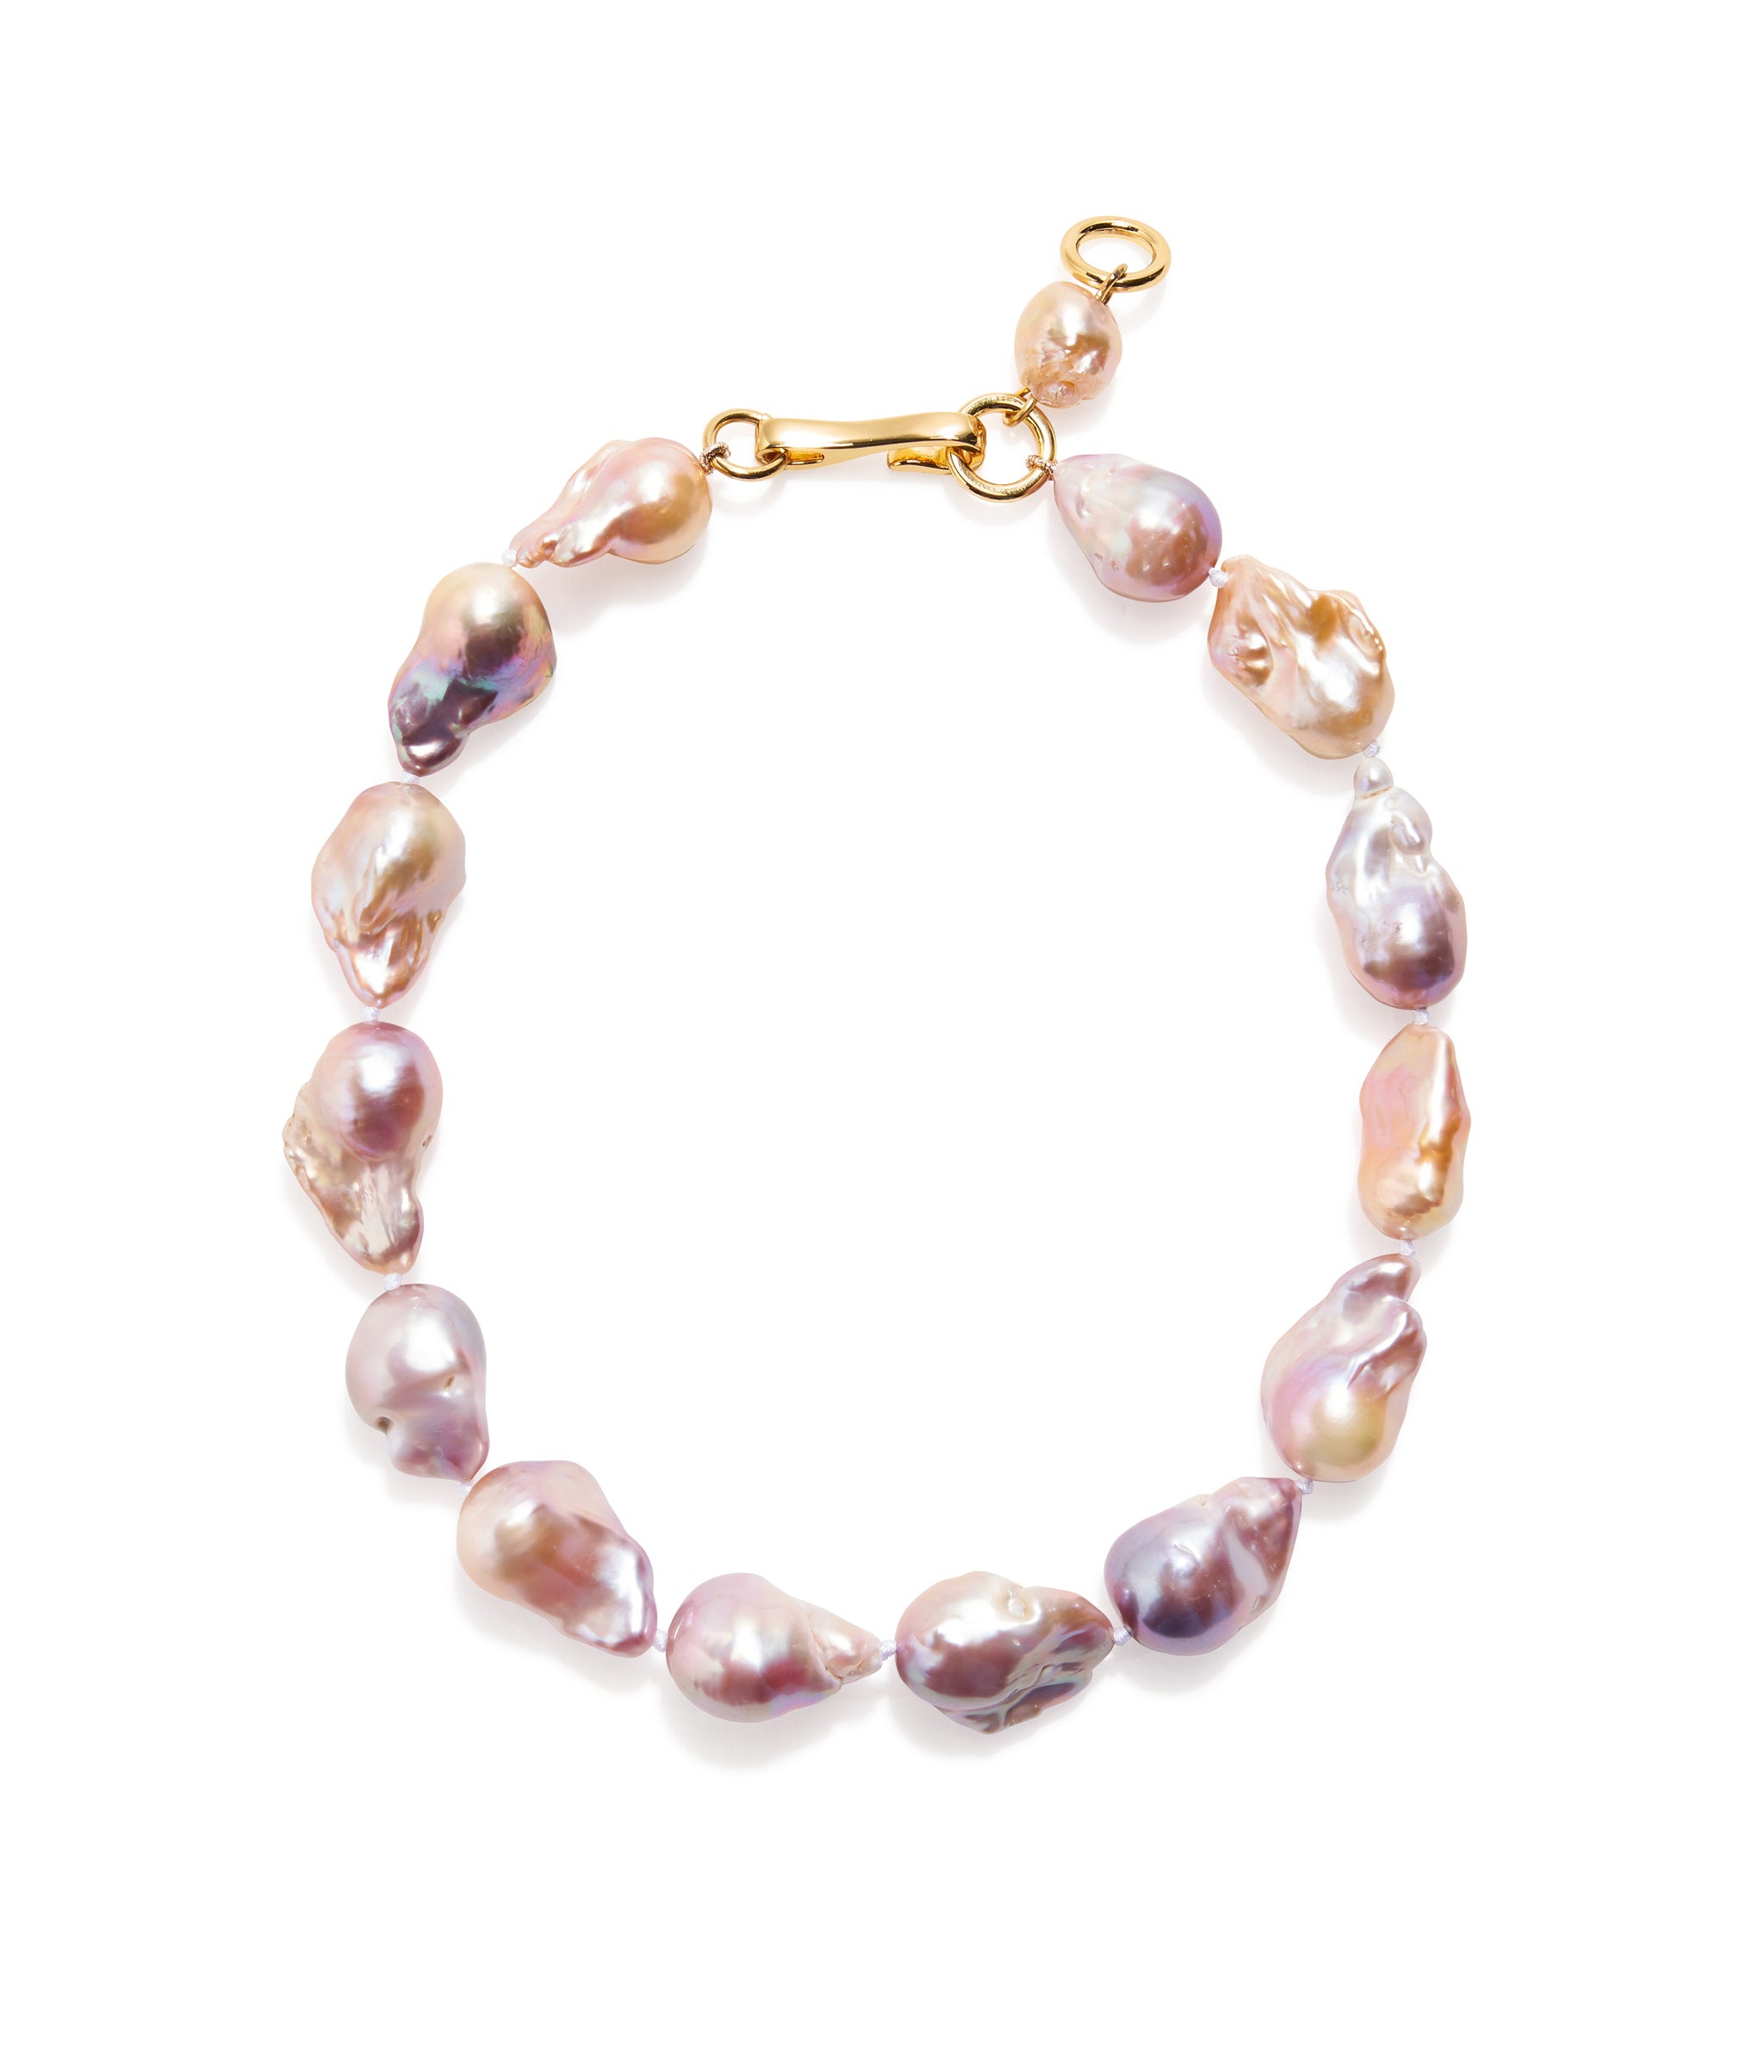 Estate Pearl Necklace In Pink. Single-strand collar of large purple-pink pearls tied with silk knots and gold-plated hook closure